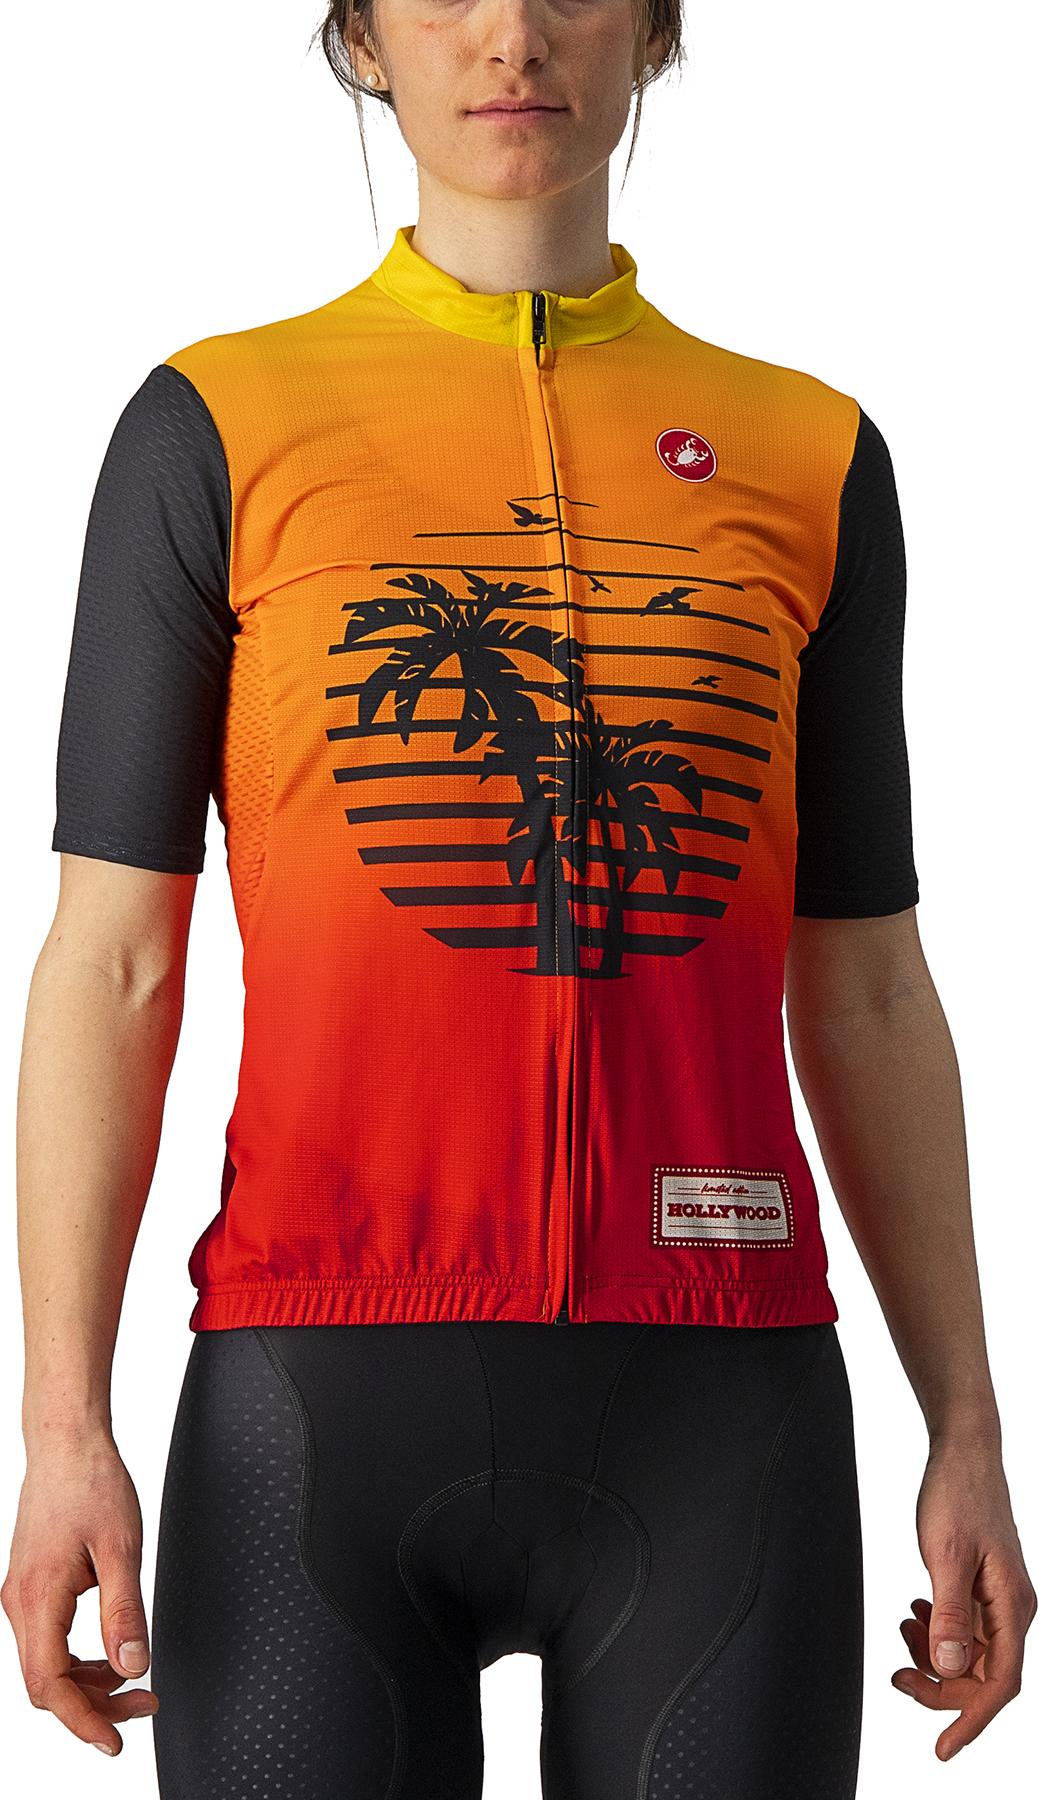 Castelli Hollywood Competizione Womens Cycling Jersey Whit - Hollywood Sunset